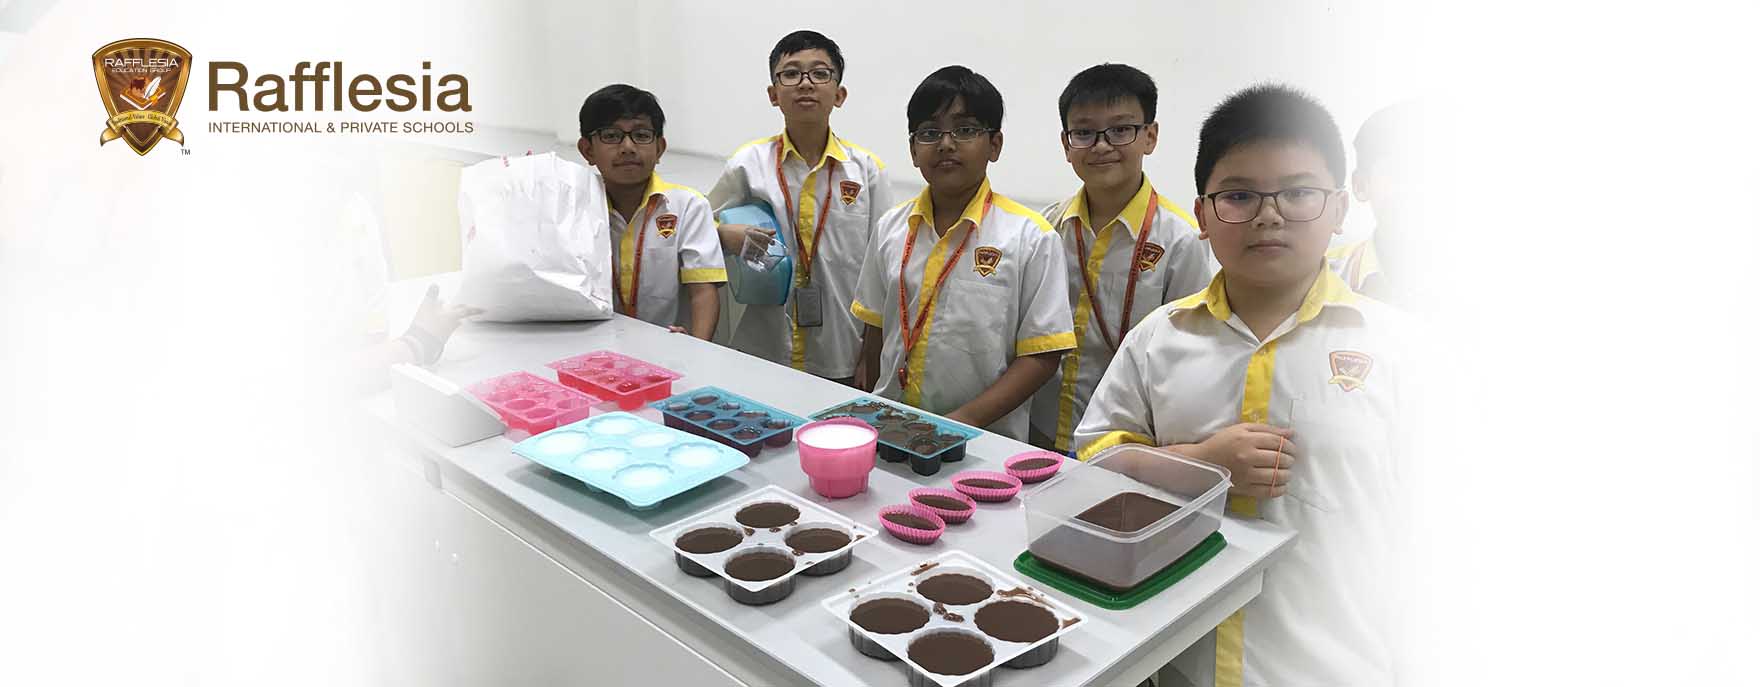 Mandarin - Students make the Jelly or Pudding mooncake